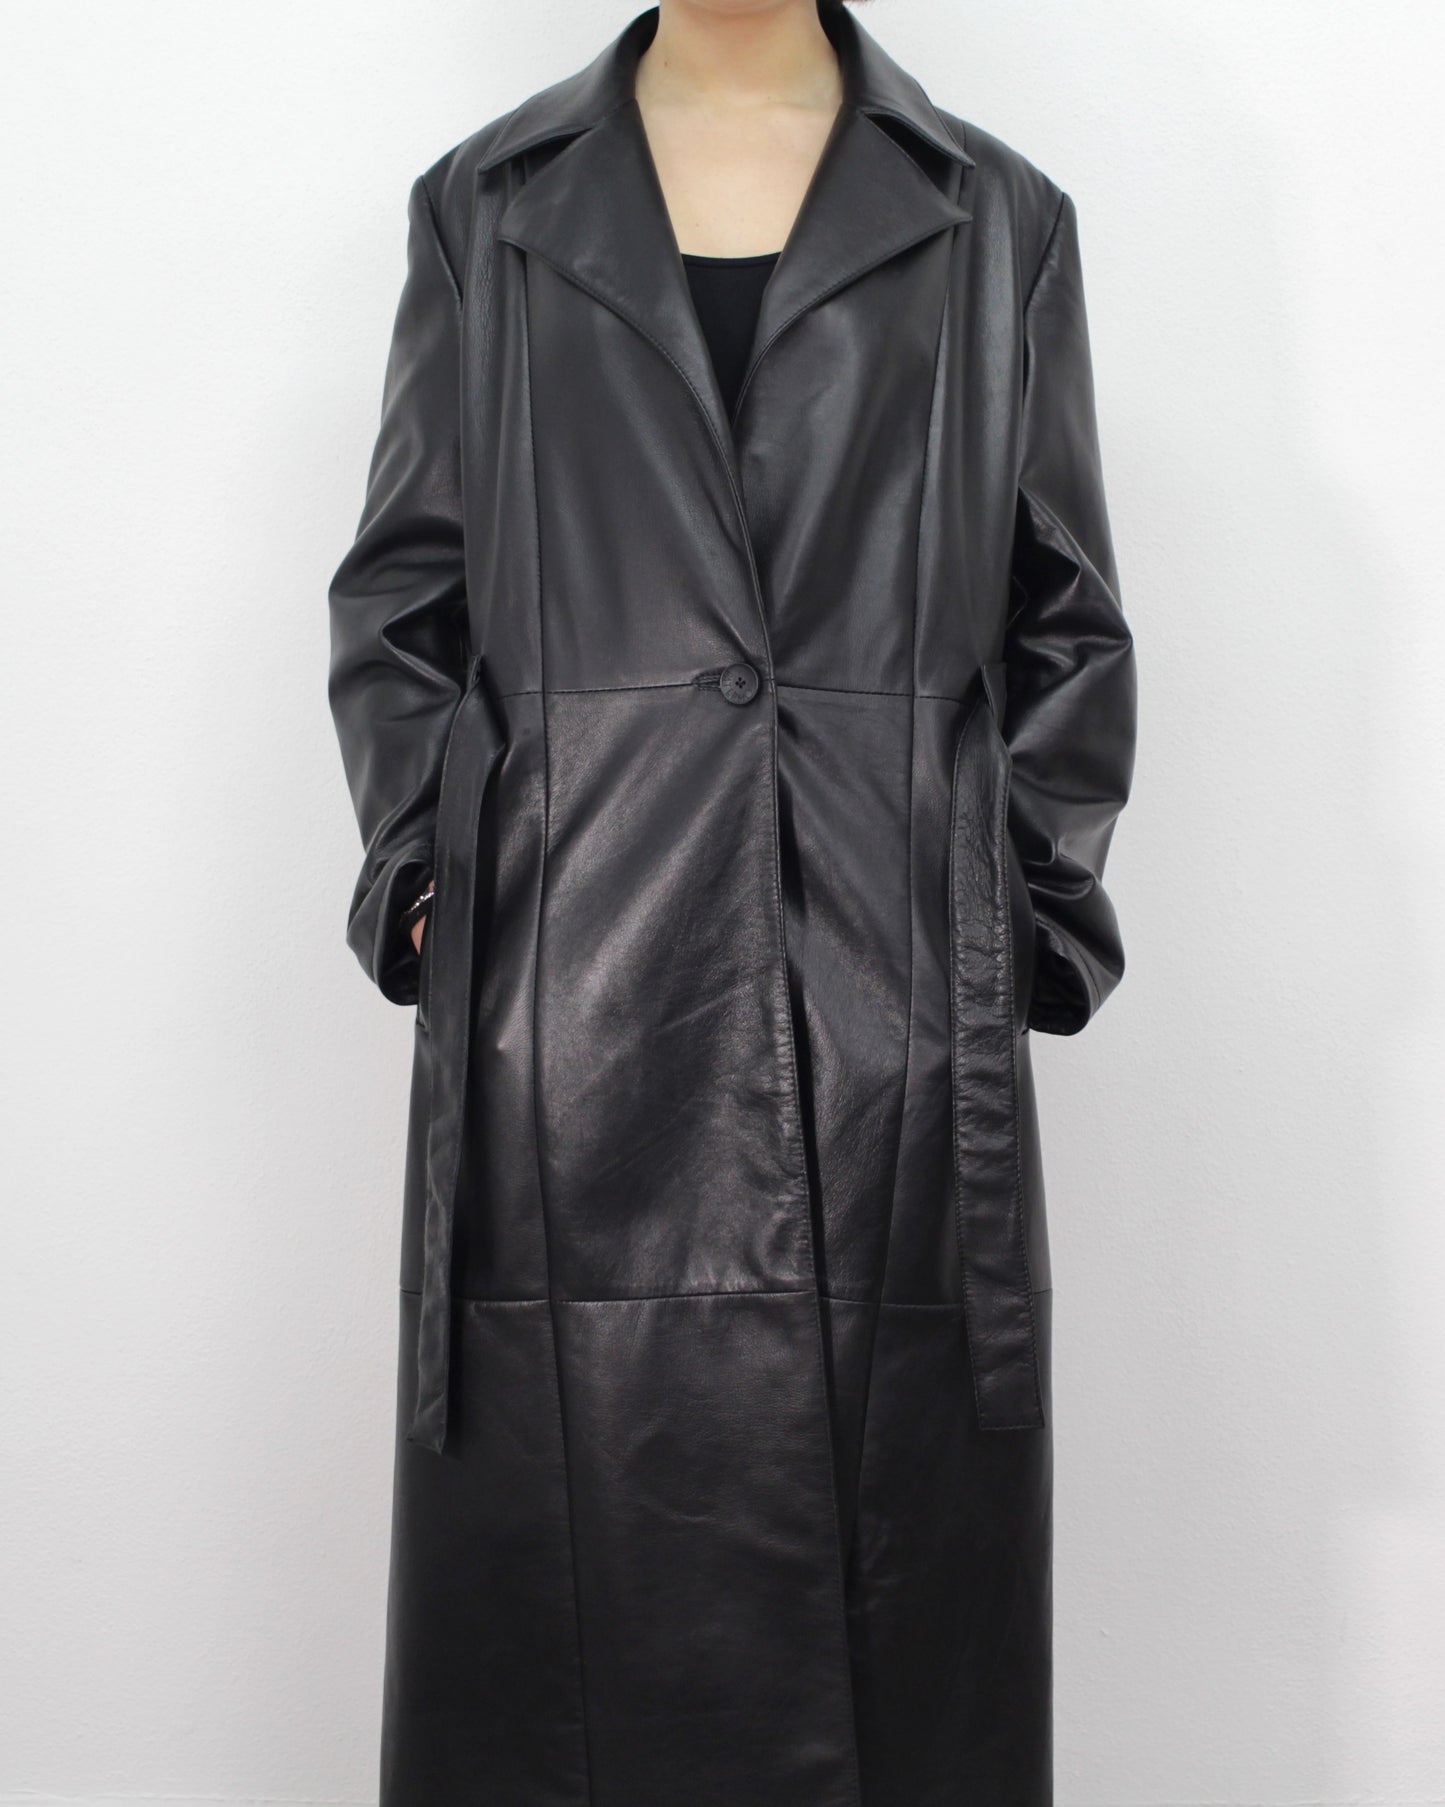 Women's Black Leather Trench Coat - Made in Italy Artisan Collection by Ferdinando Patermo